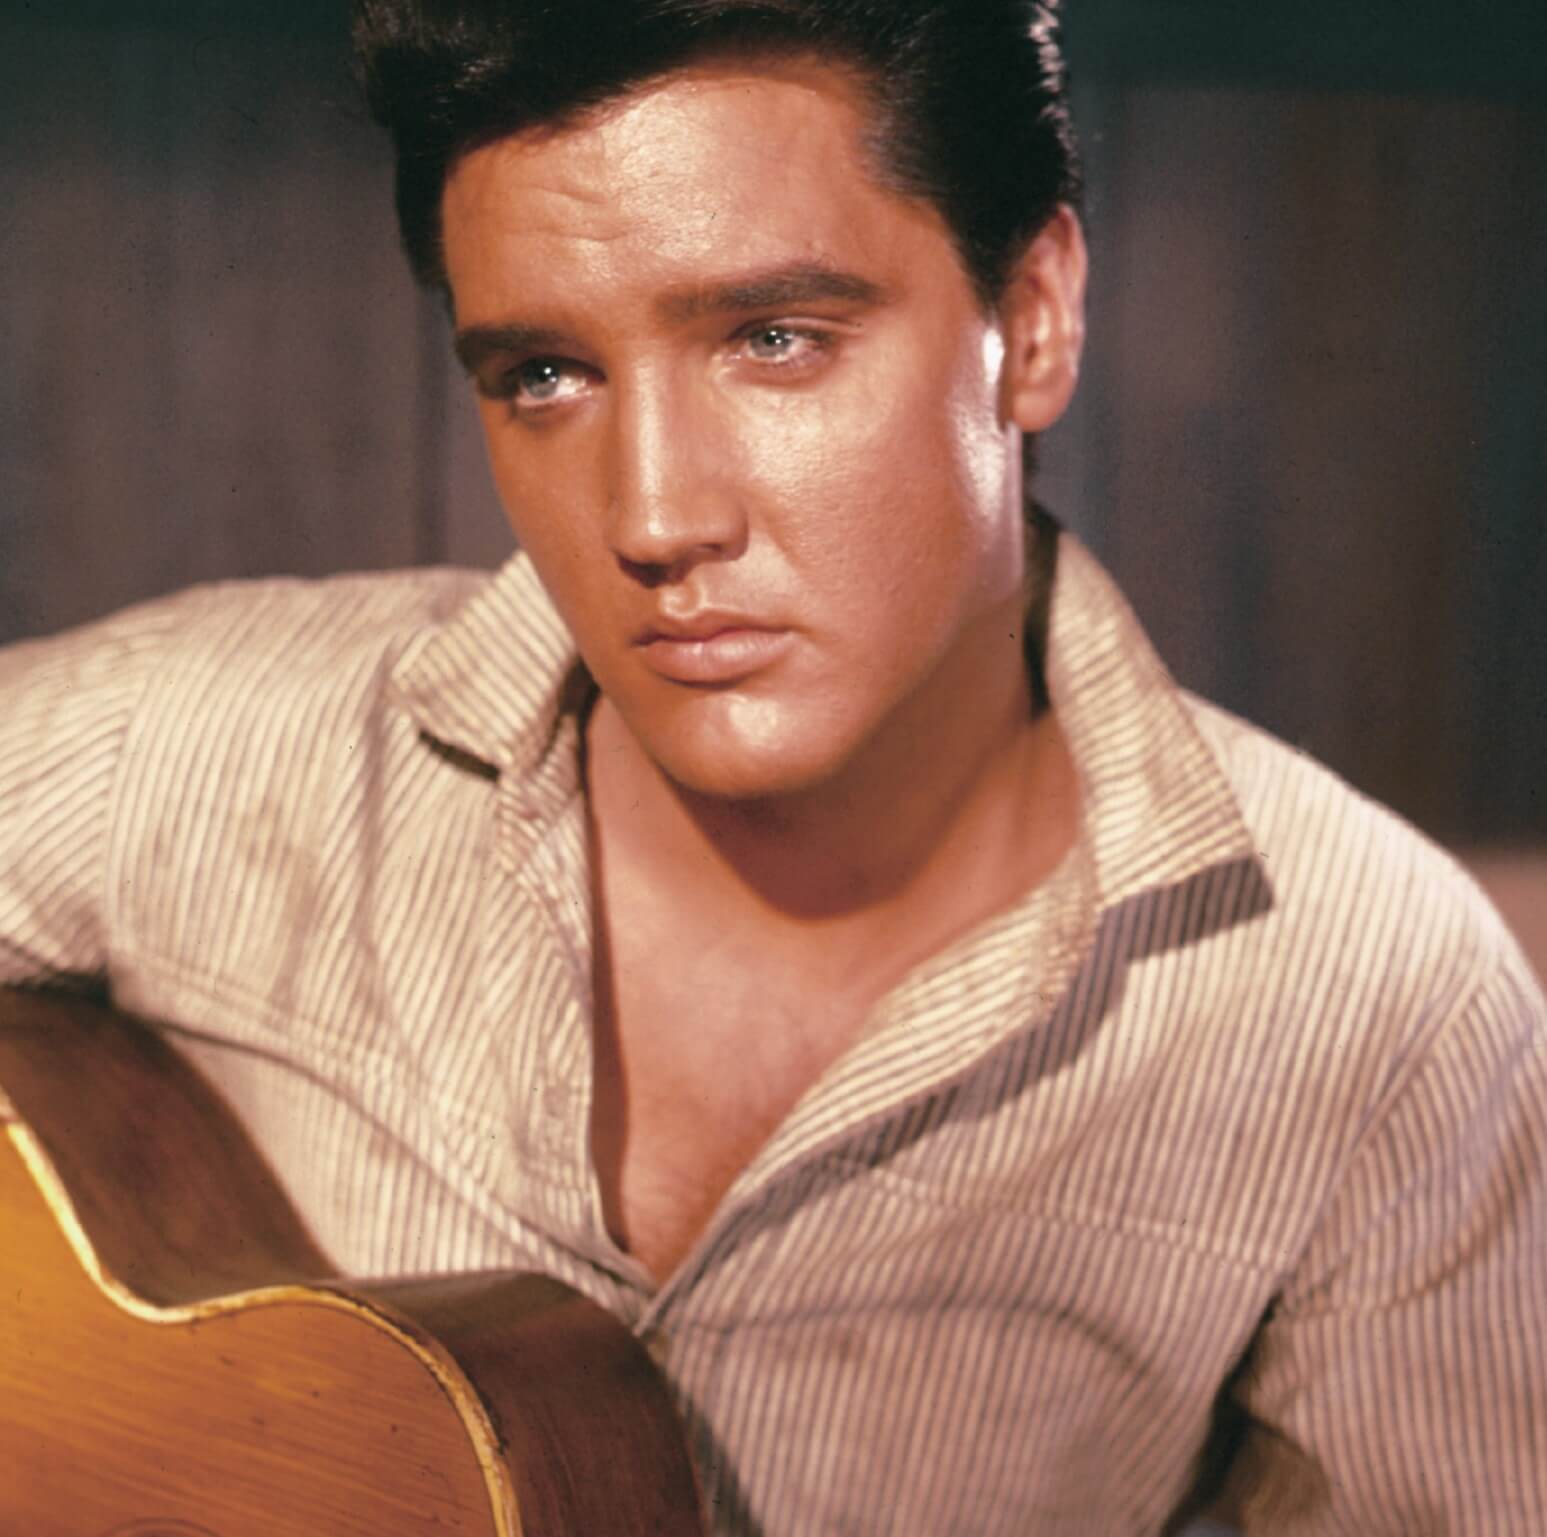 Elvis Presley, a singer mentioned in Marc Cohn's 'Walking in Memphis," with a guitar